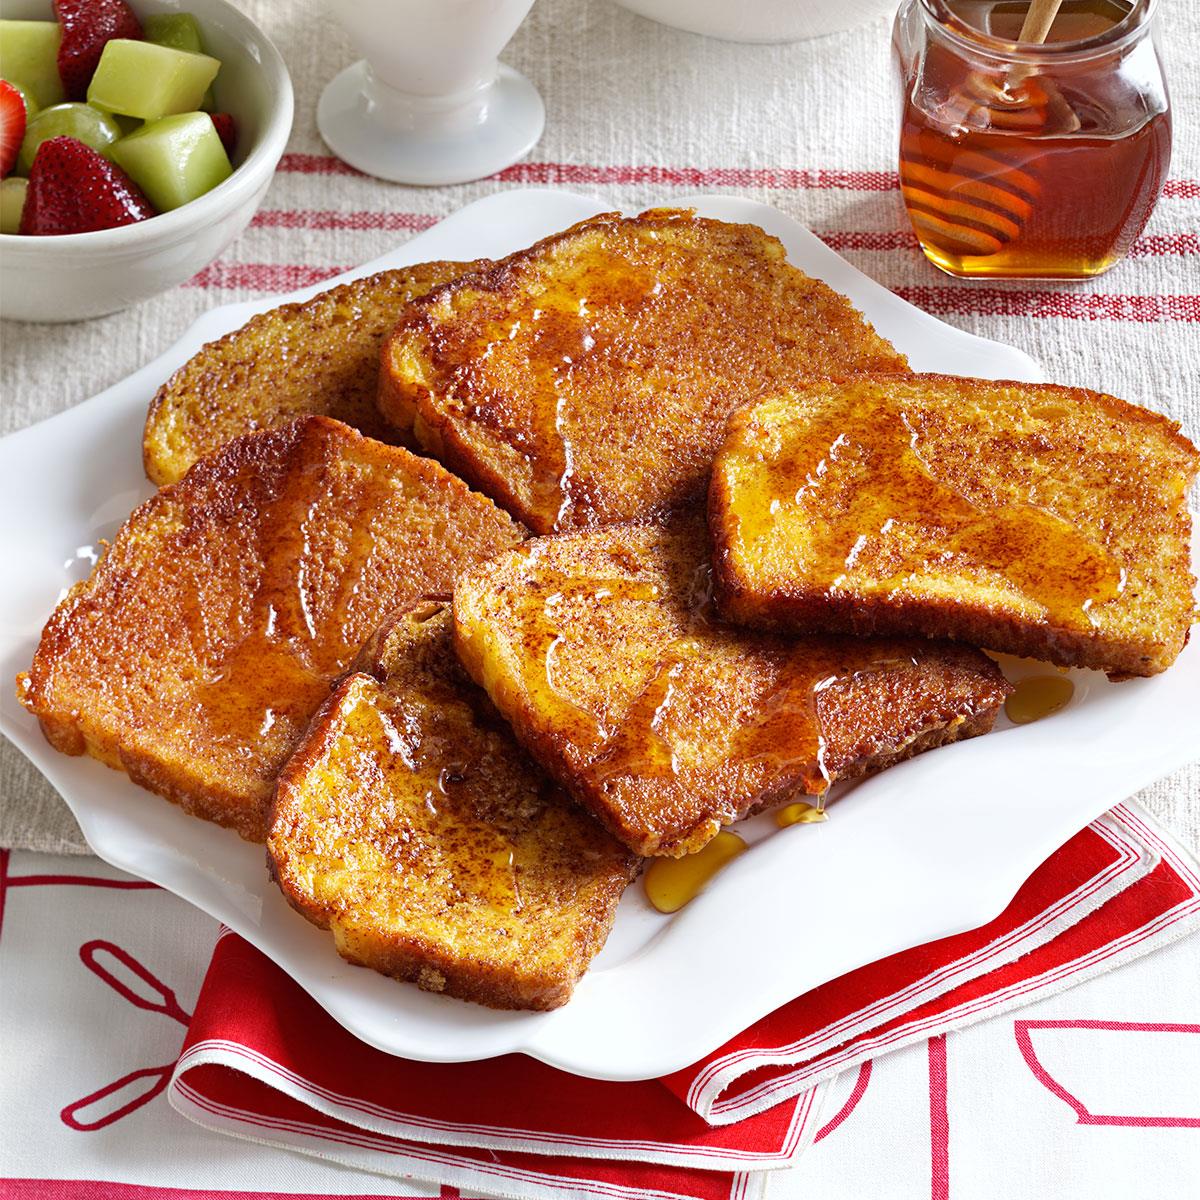 You got: French Toast! What Should I Eat for Breakfast? 🥞 Take This Quiz If You Don’t Know What to Eat